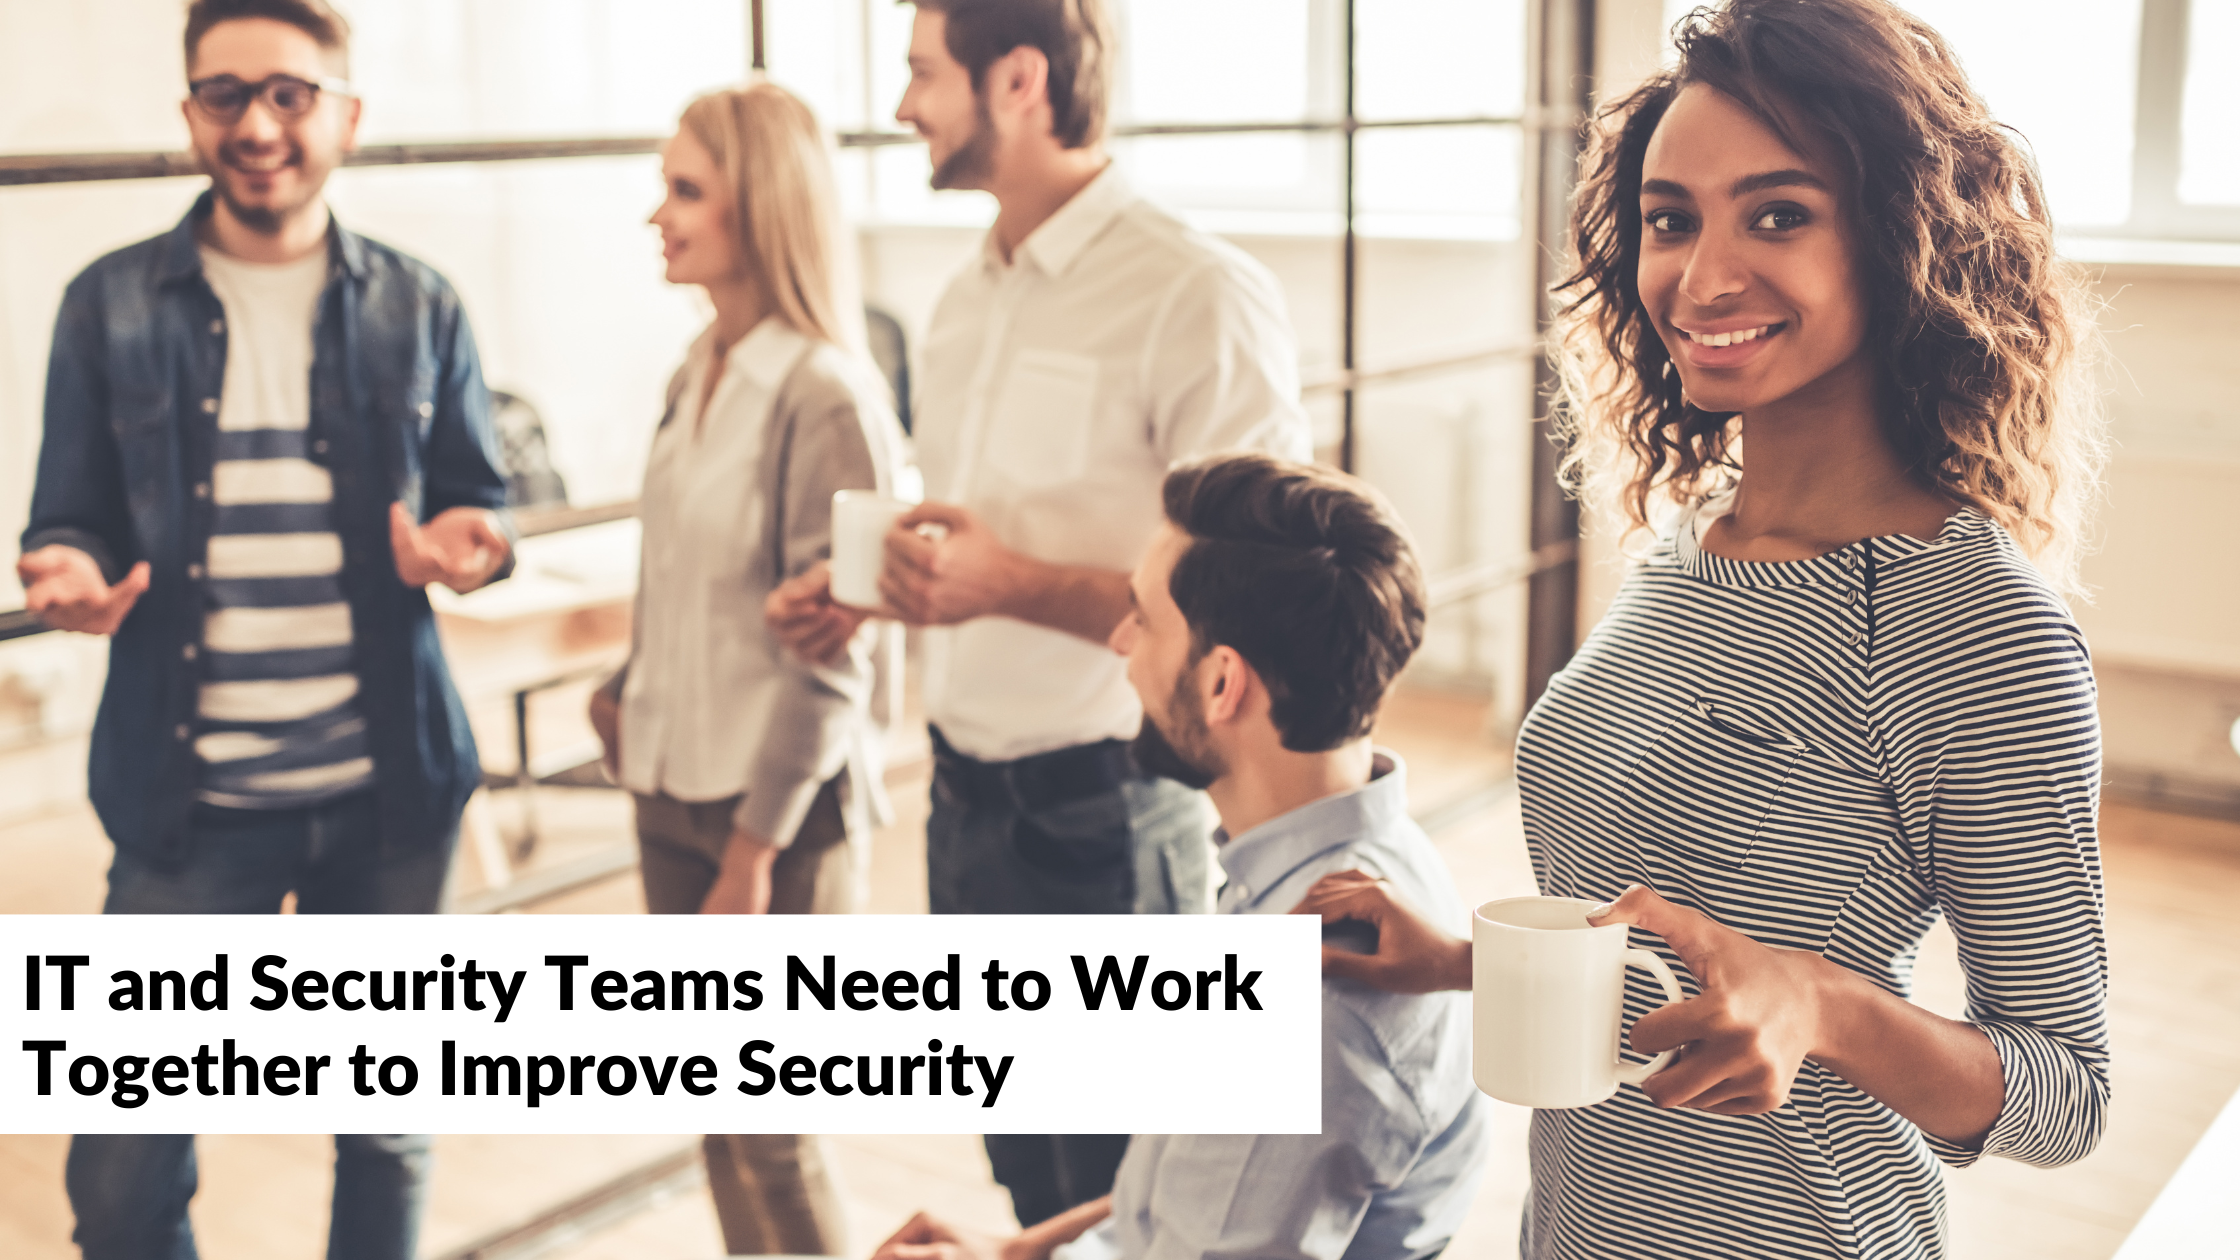 IT and Security Teams Need to Work Together to Improve Security